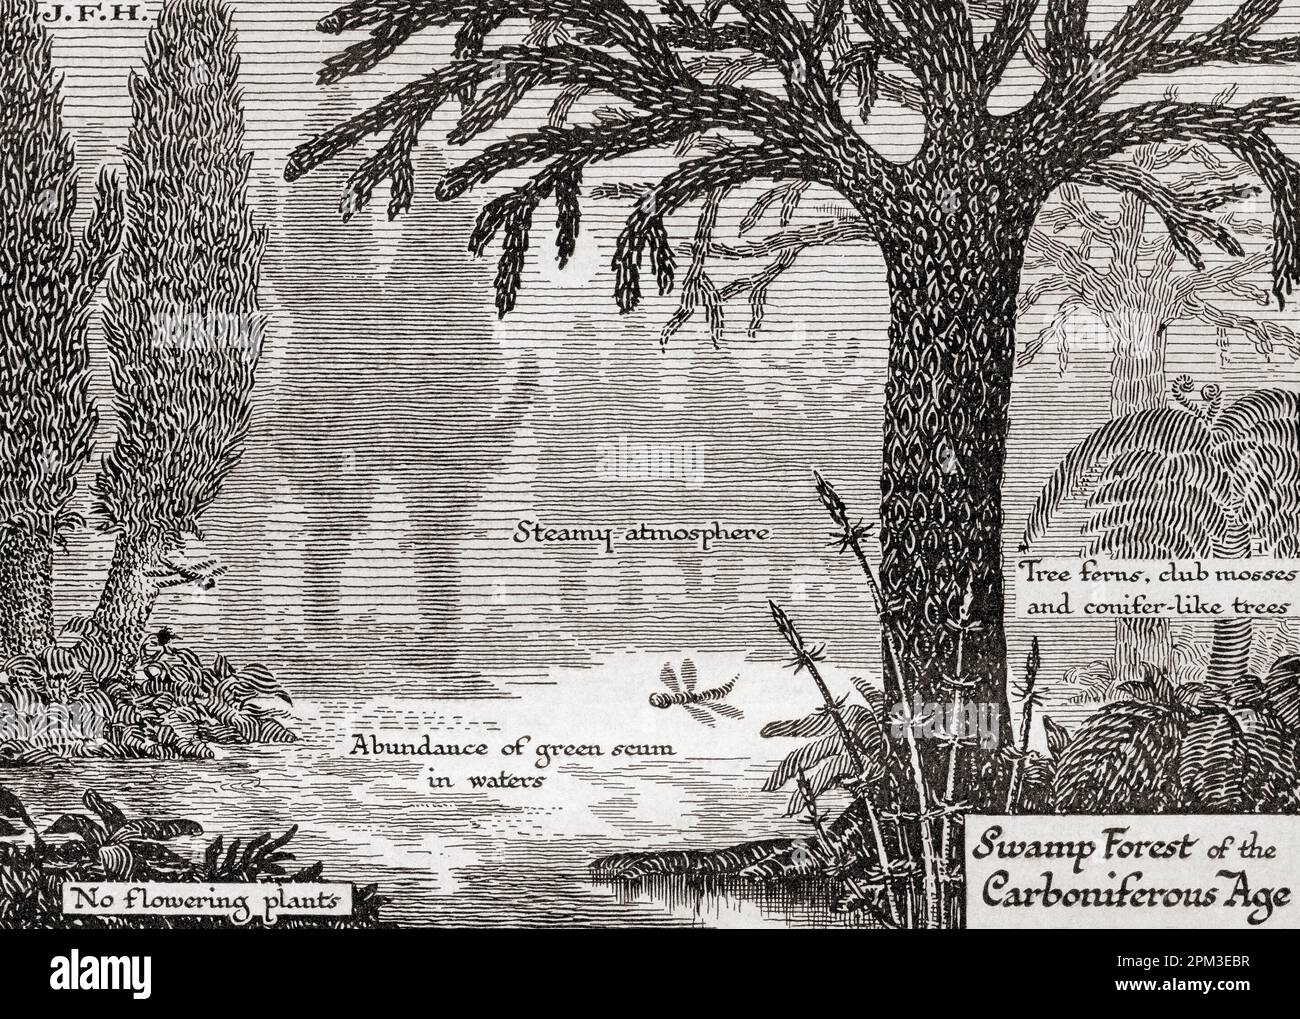 Diagram of life in the later Paleozoic or Palaeozoic Era.  Swamp forest of the Carboniferous Age. From the book Outline of History by H.G. Wells, published 1920. Stock Photo